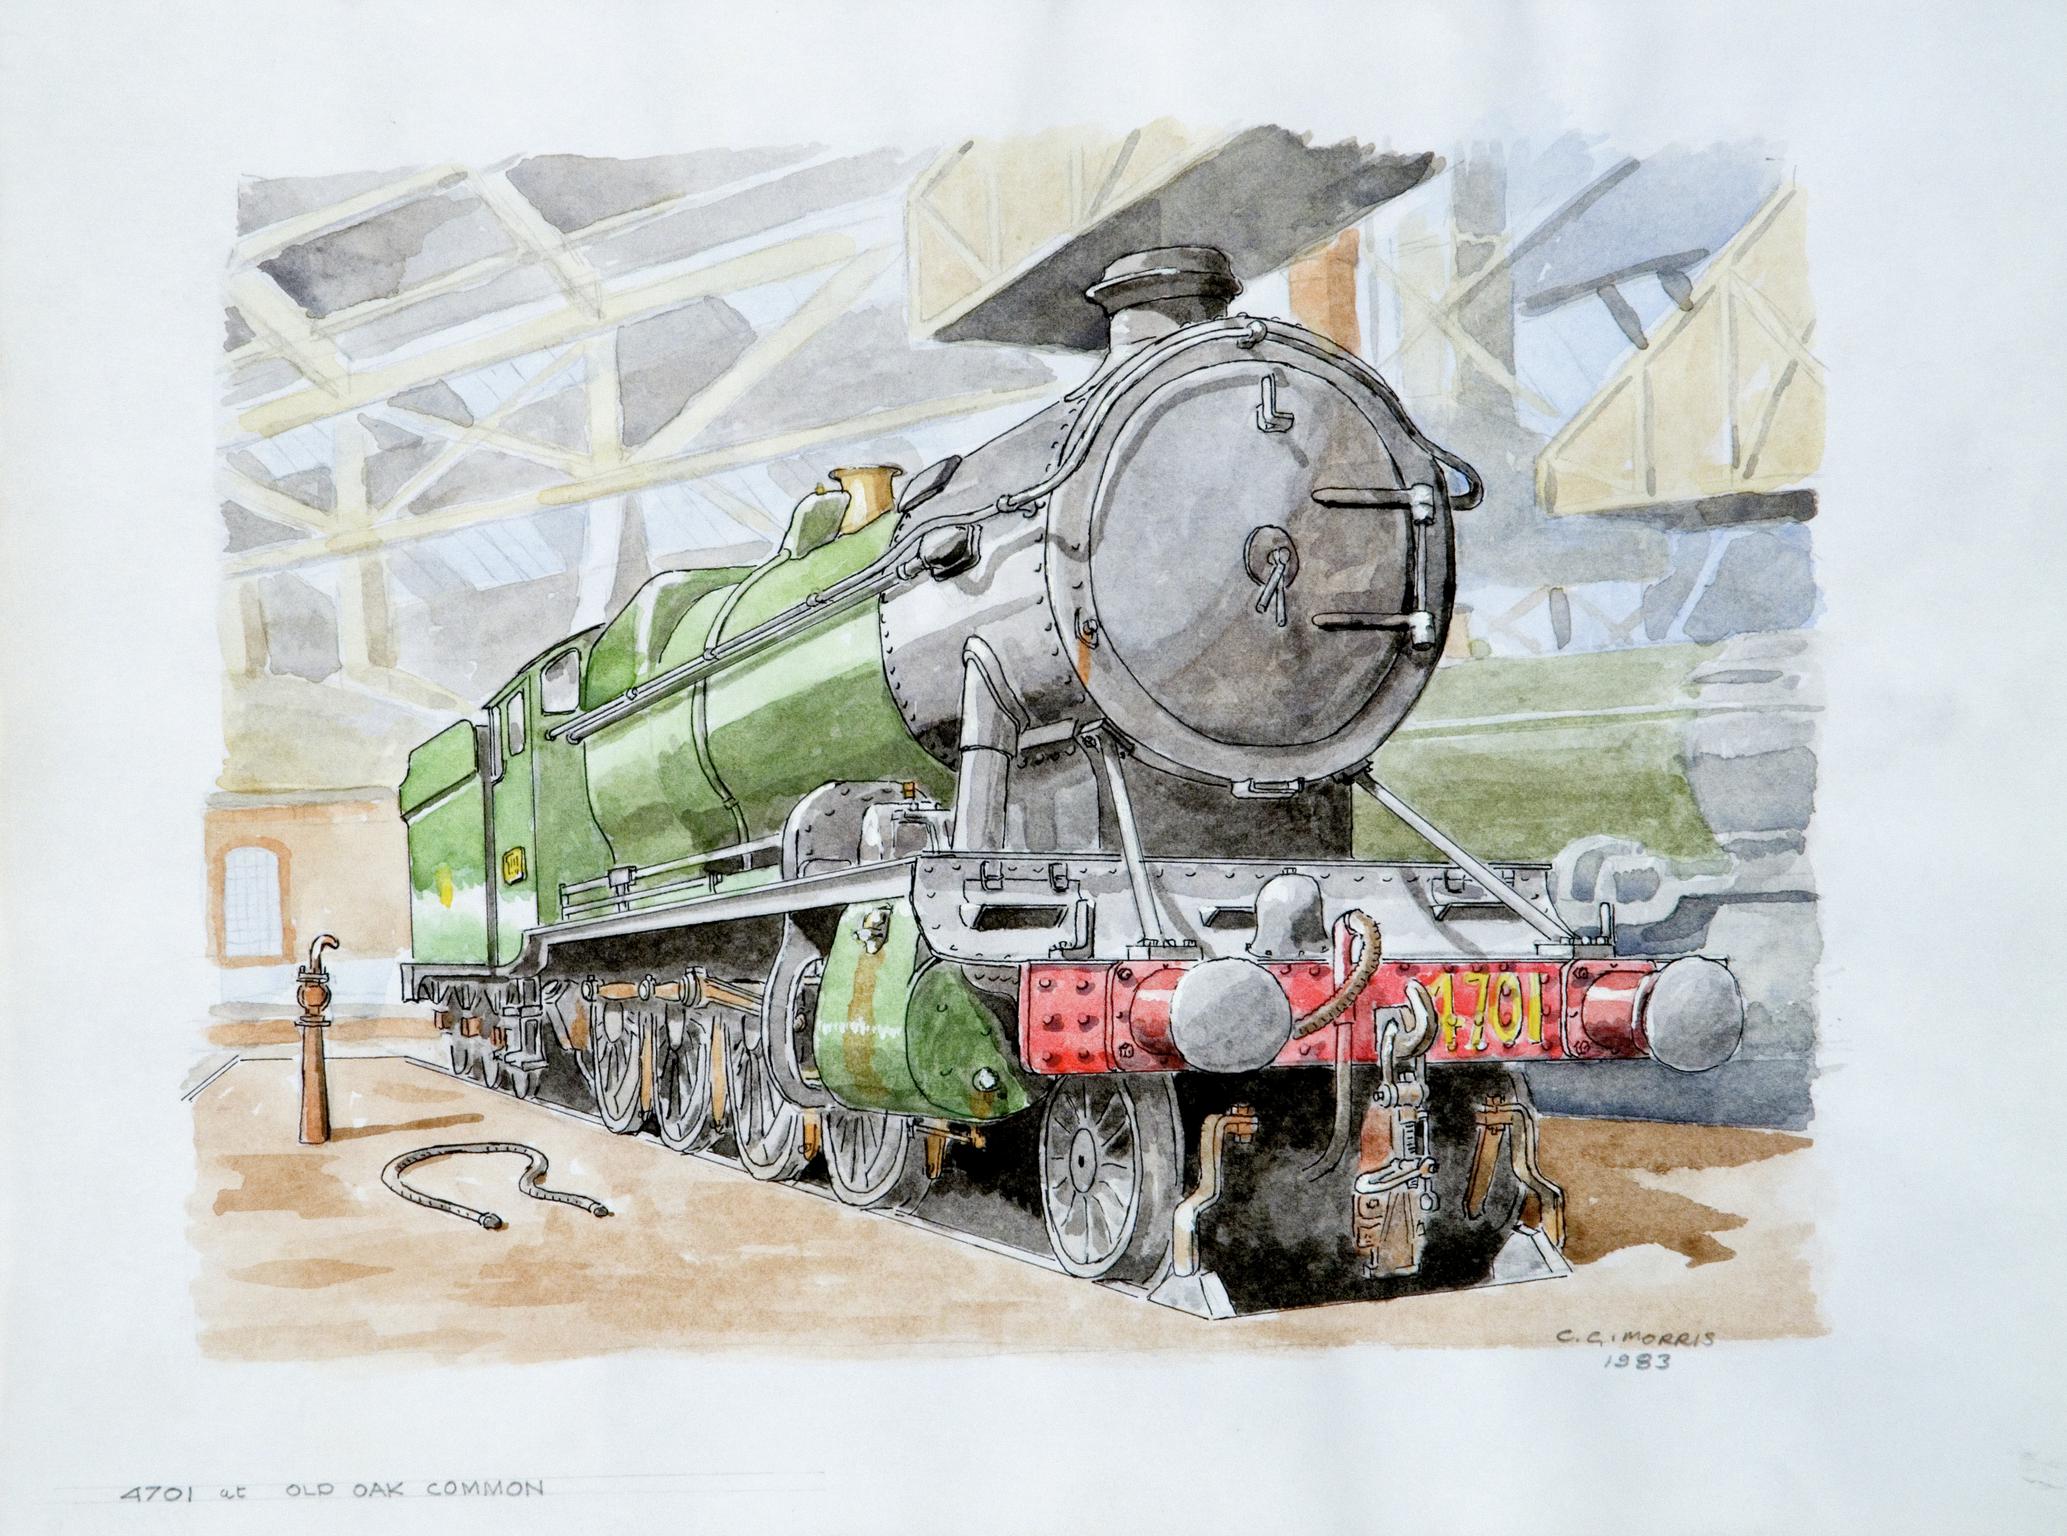 4701 at Old Oak Common (watercolour)